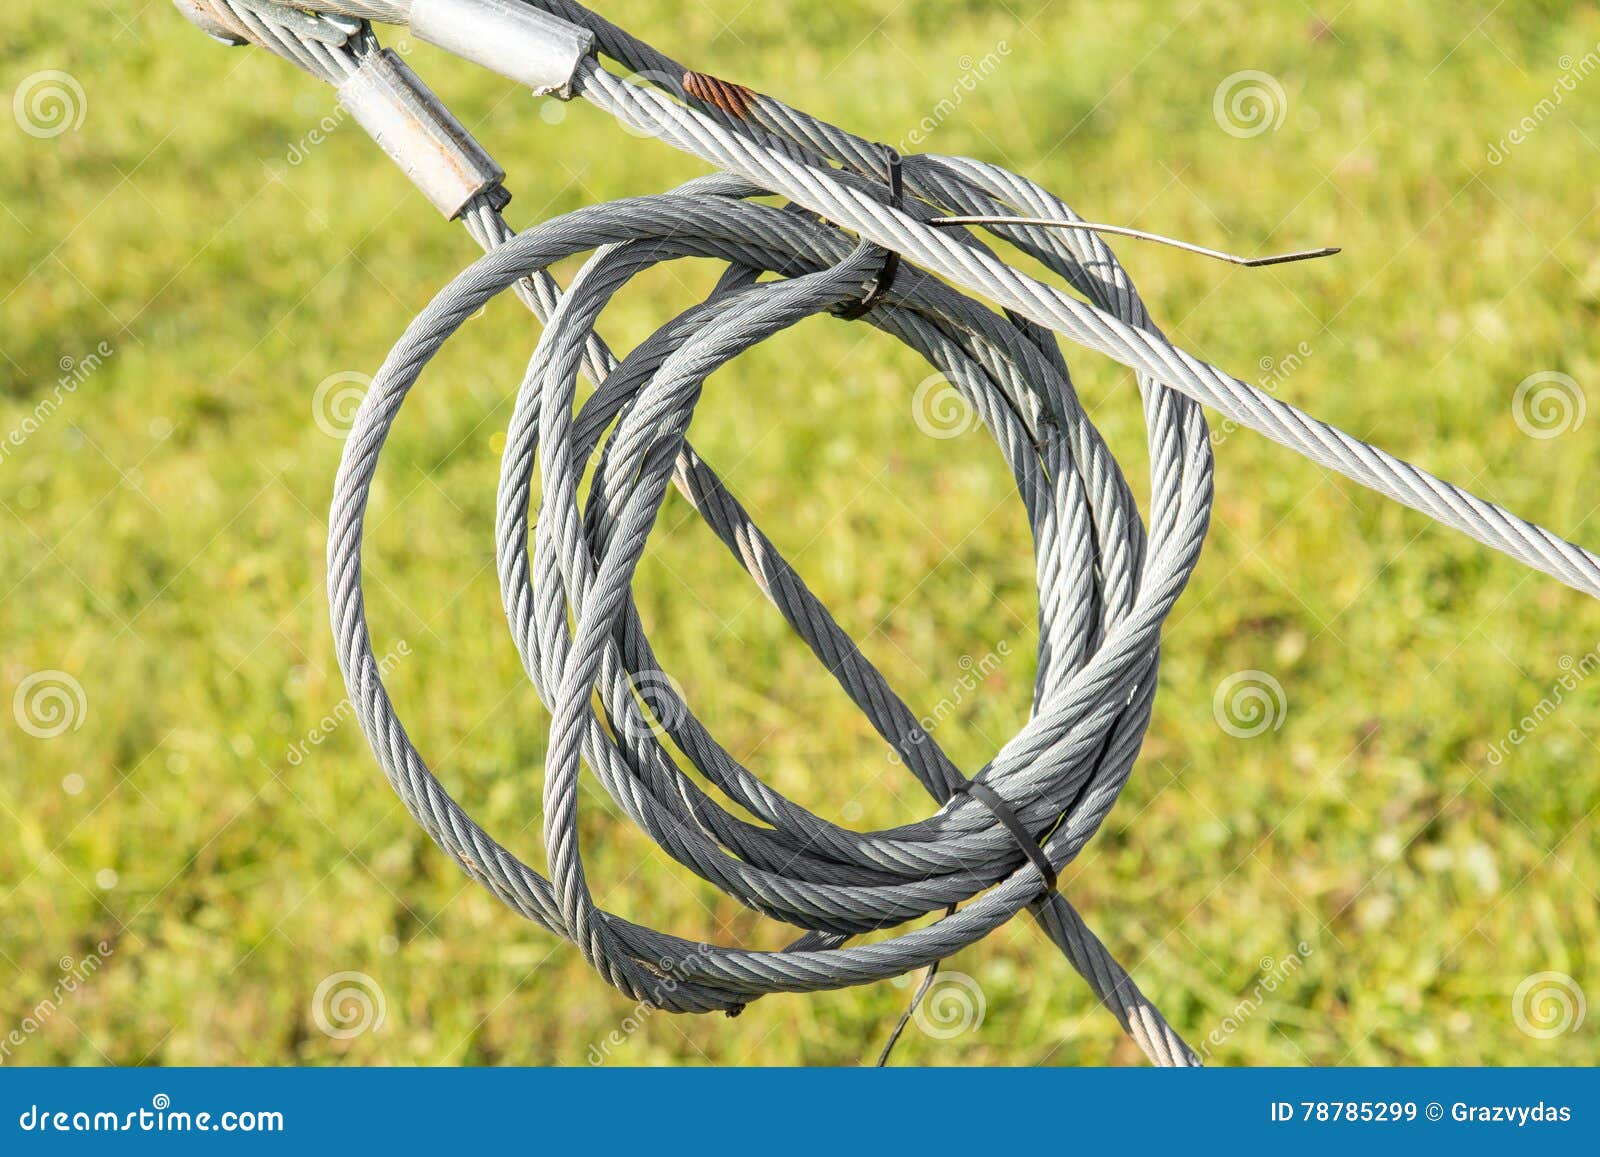 Wire hawser rope stock image. Image of rope, safety, connection - 78785299